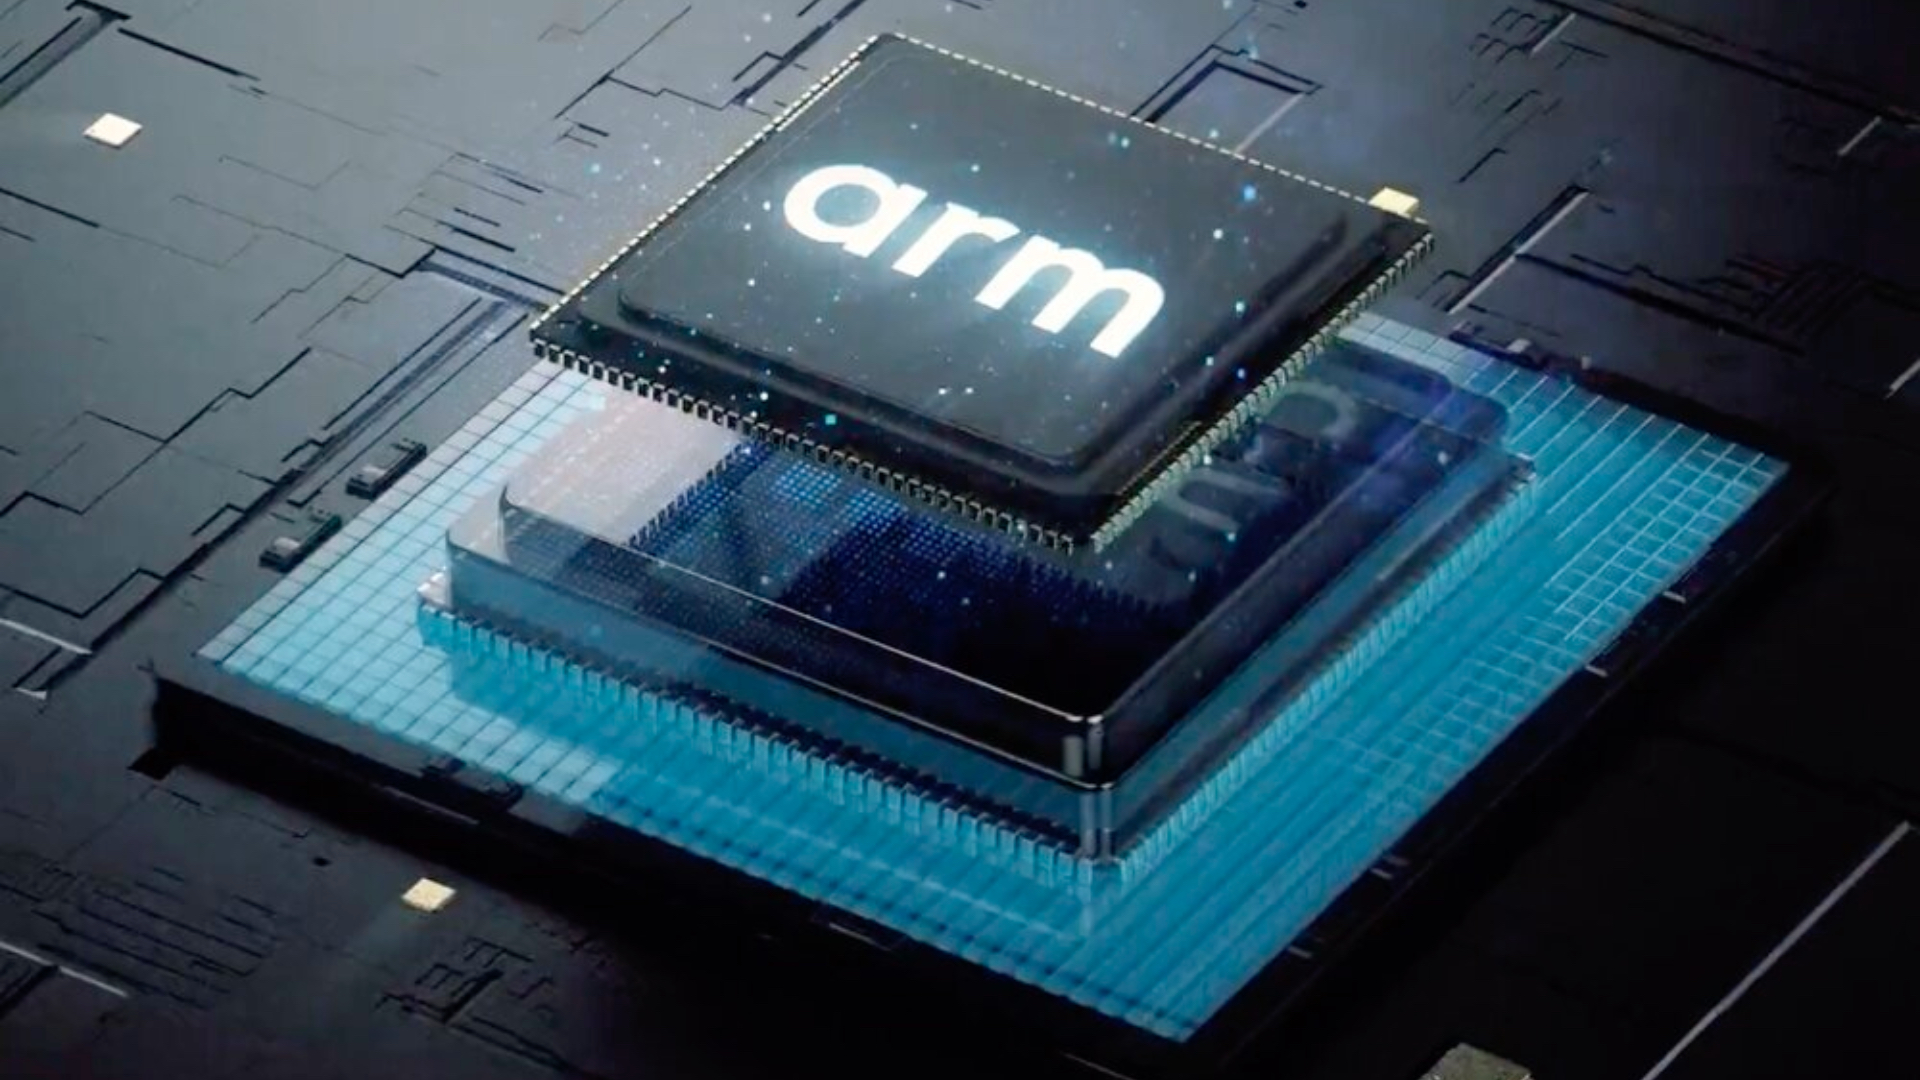 Samsung's acquisition of ARM highly unlikely because of antitrust issues - SamMobile